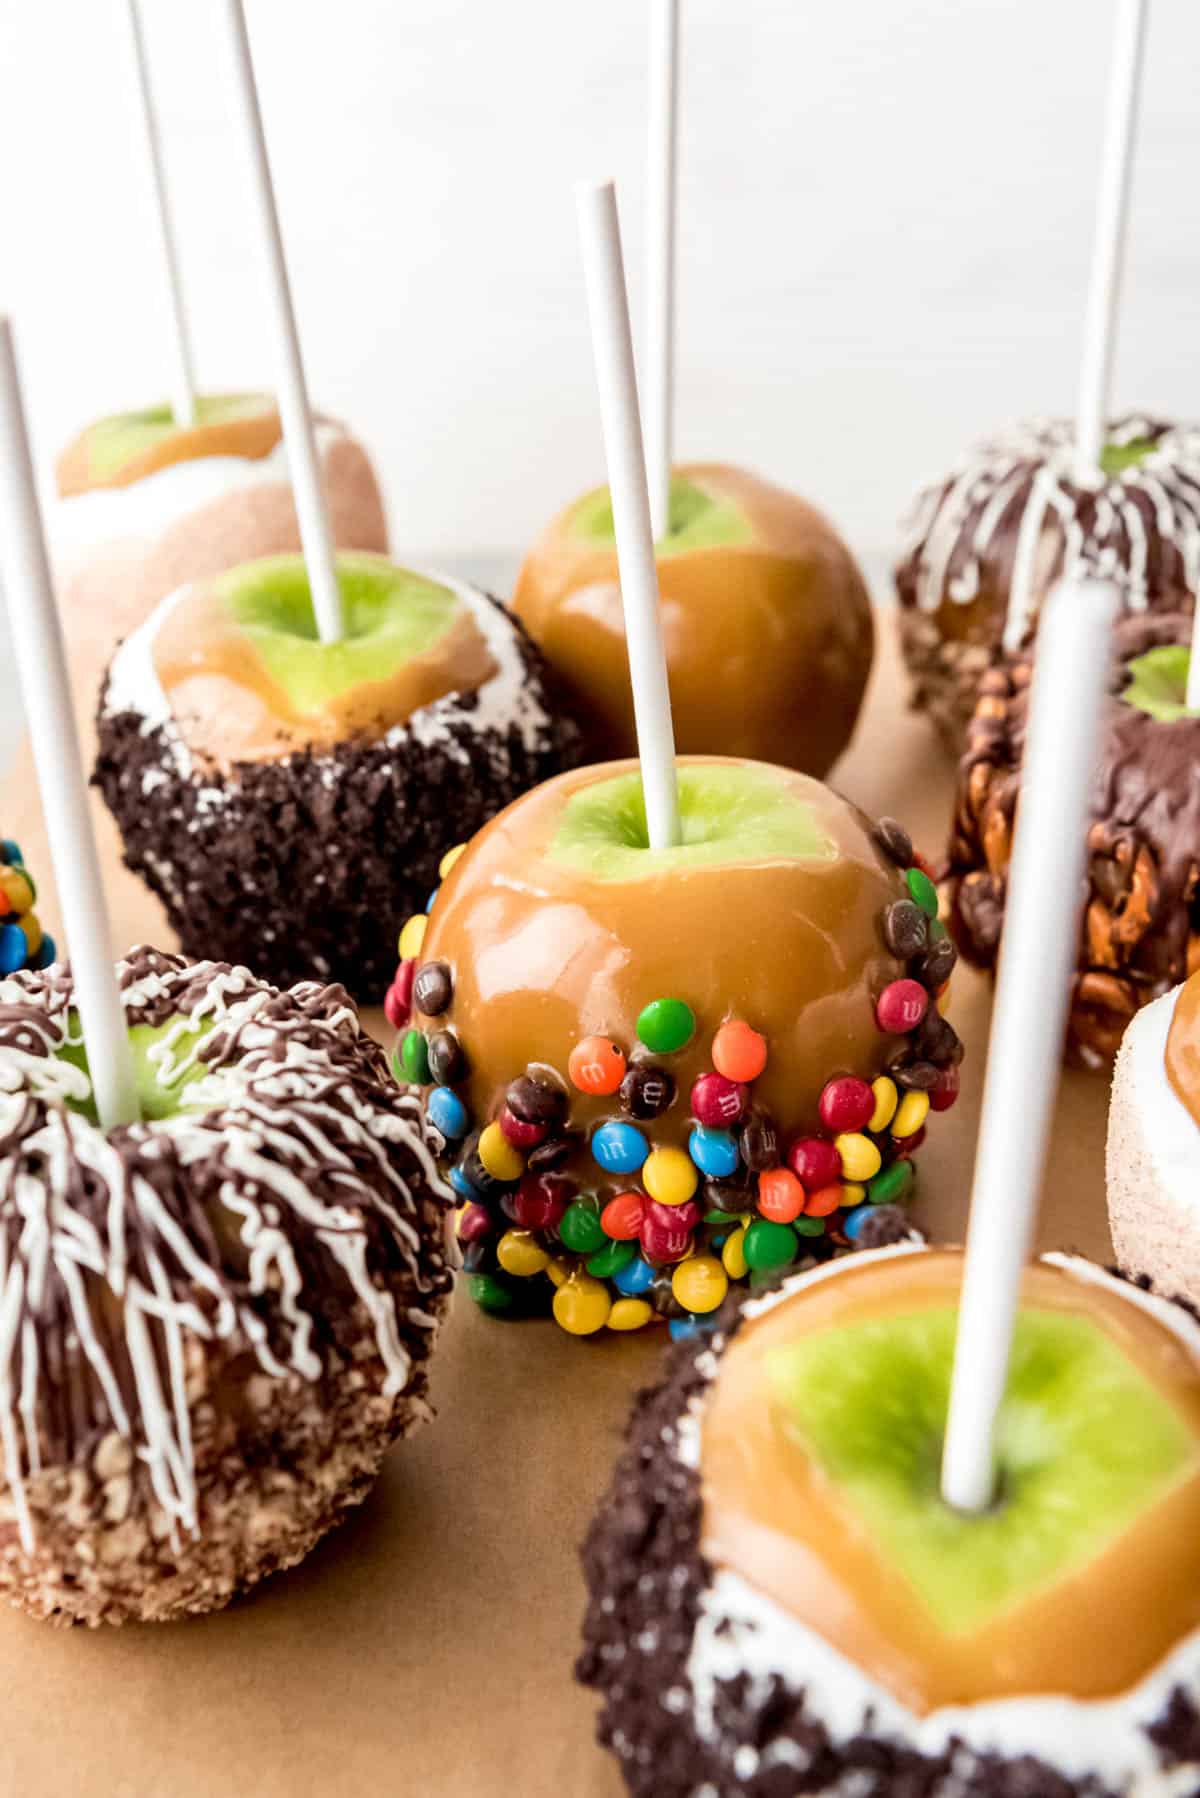 An image of different types of homemade caramel apples.